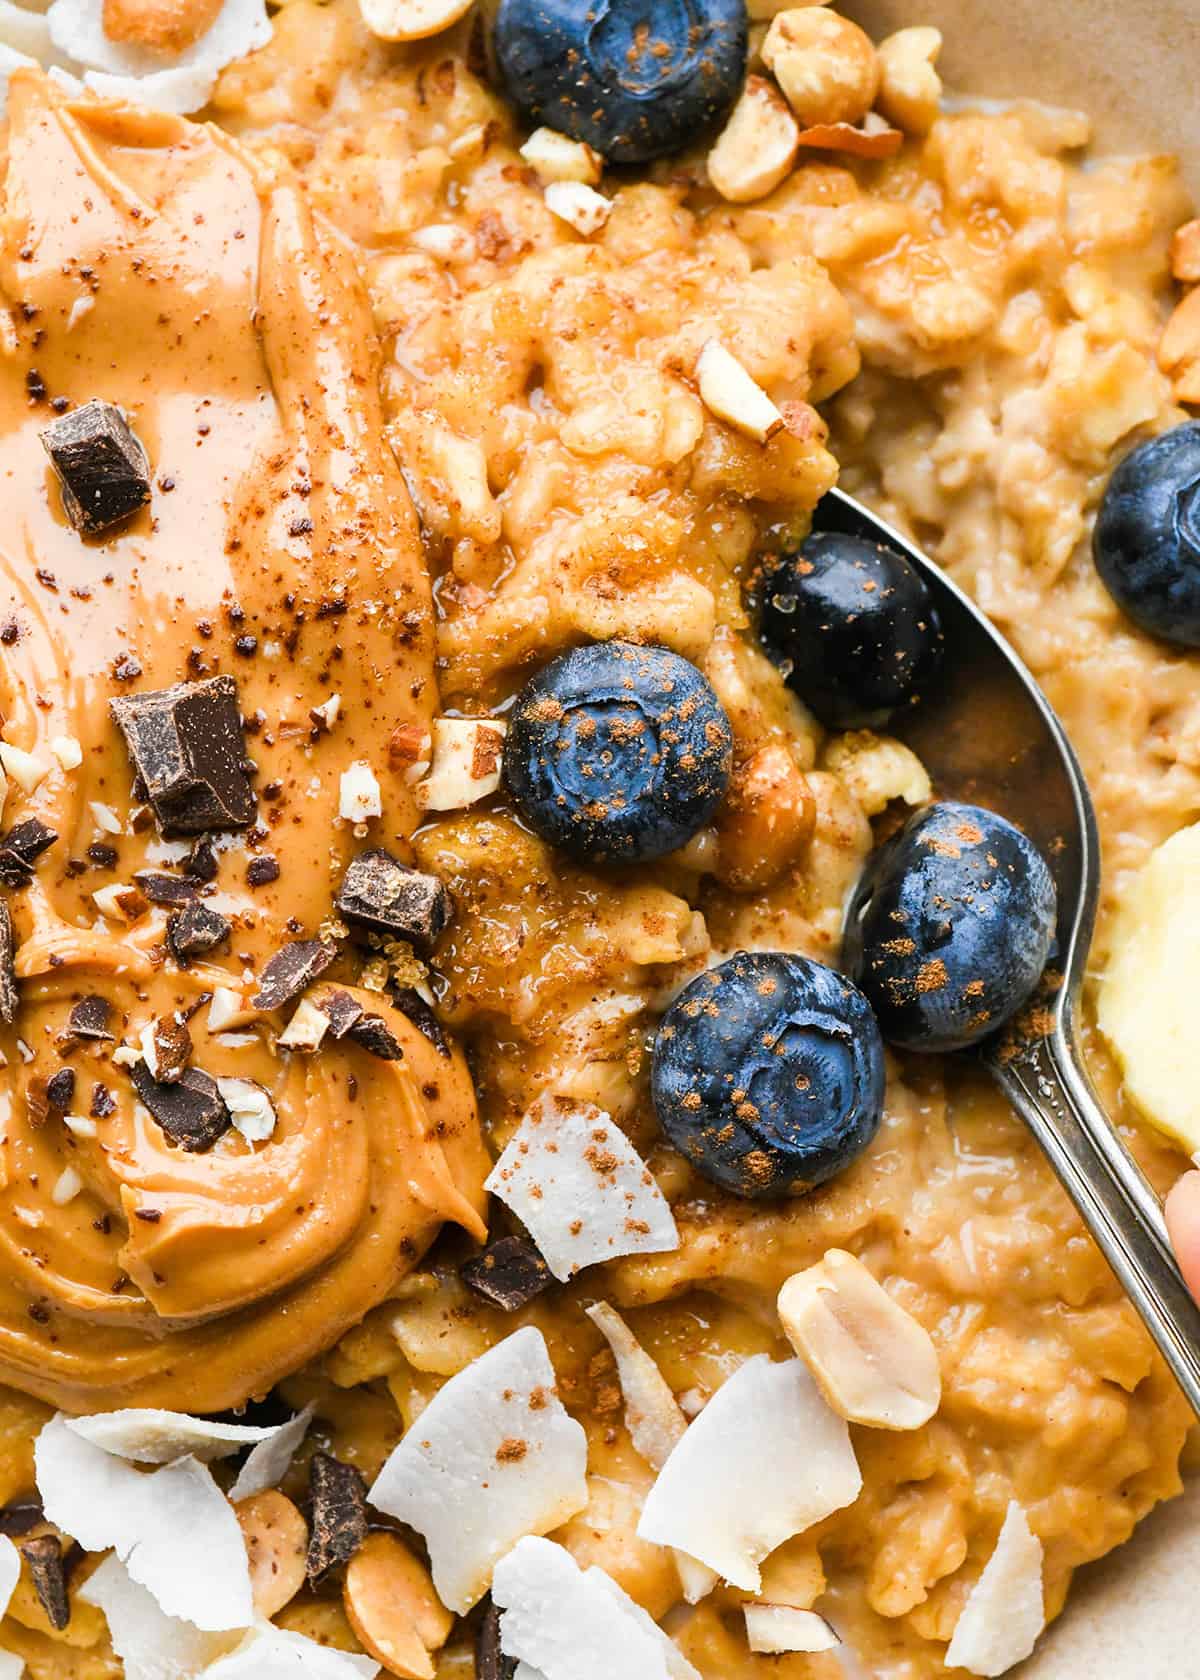 up close photo of a spoon taking a scoop of Peanut Butter Oatmeal in a bowl topped with blueberries and other toppings